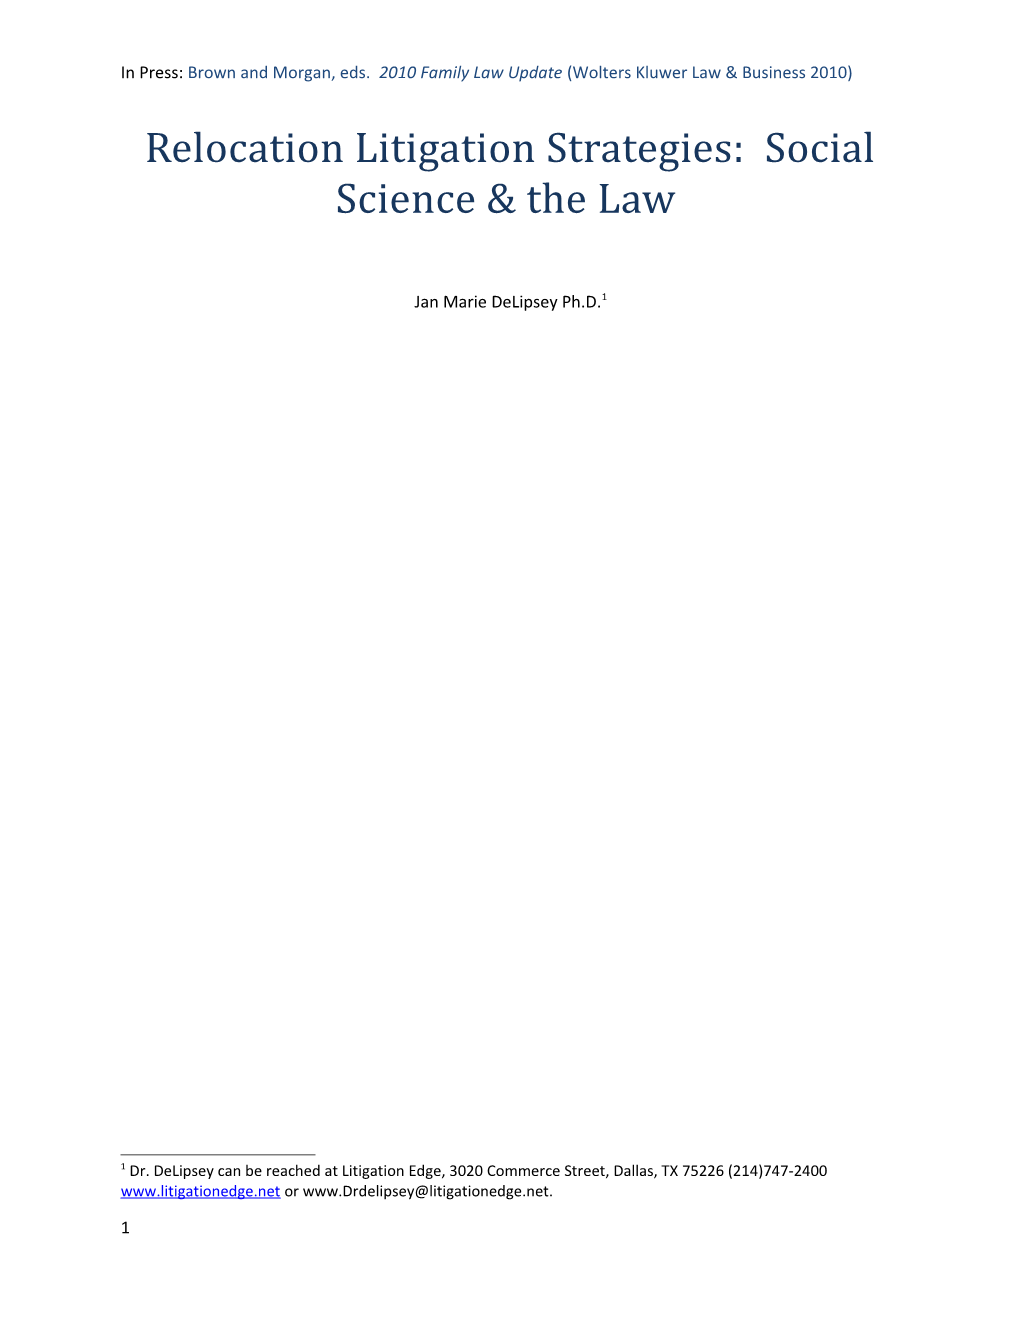 Relocation Litigation Strategies: Social Science & the Law